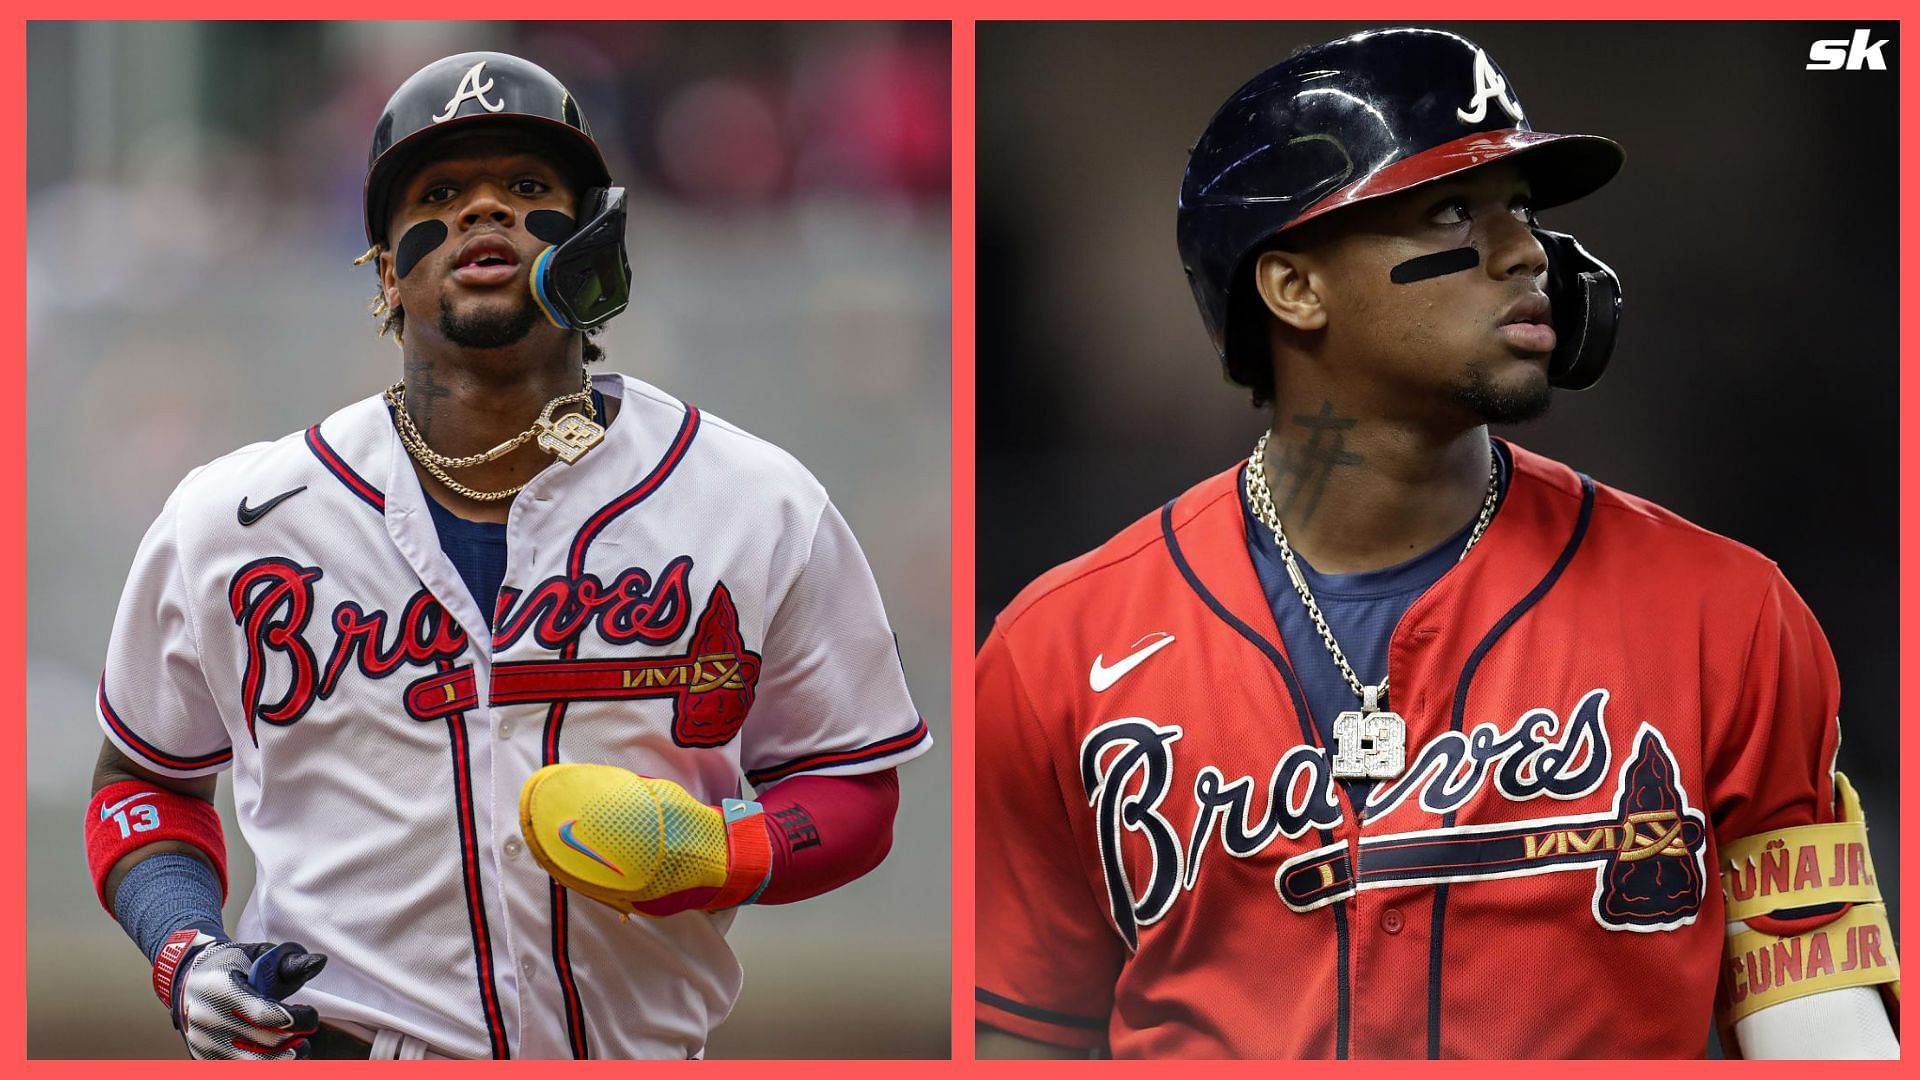 MLB The Show 23 Best Cards: 99 overall Ronald Acuna Jr. attributes, cost, and more